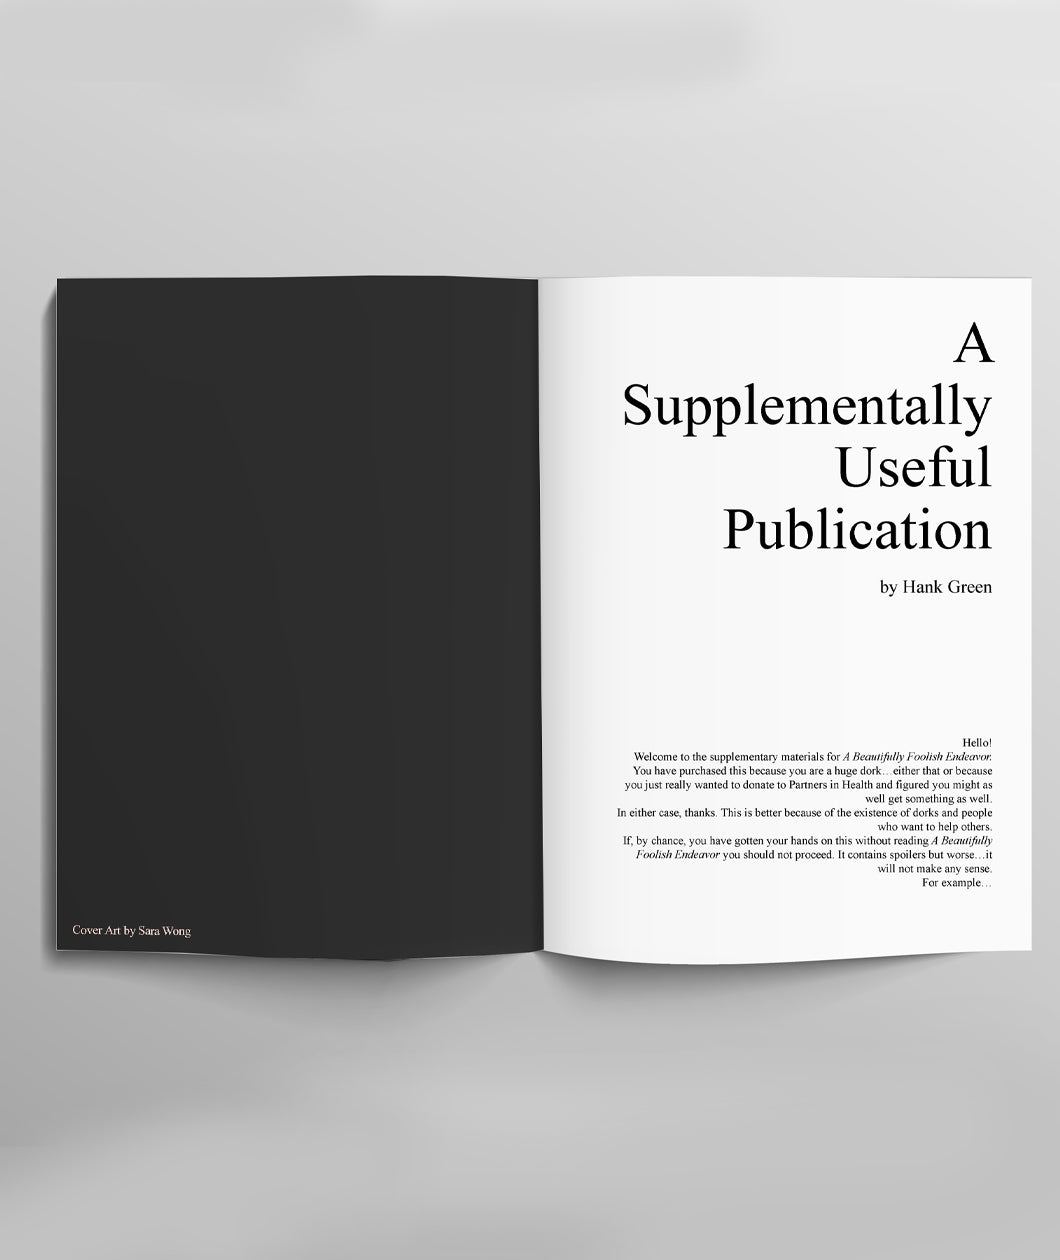 The title spread of the booklet. One black page, and one that has publishing info, including the title A Supplementally Useful Publication by Hank Green.